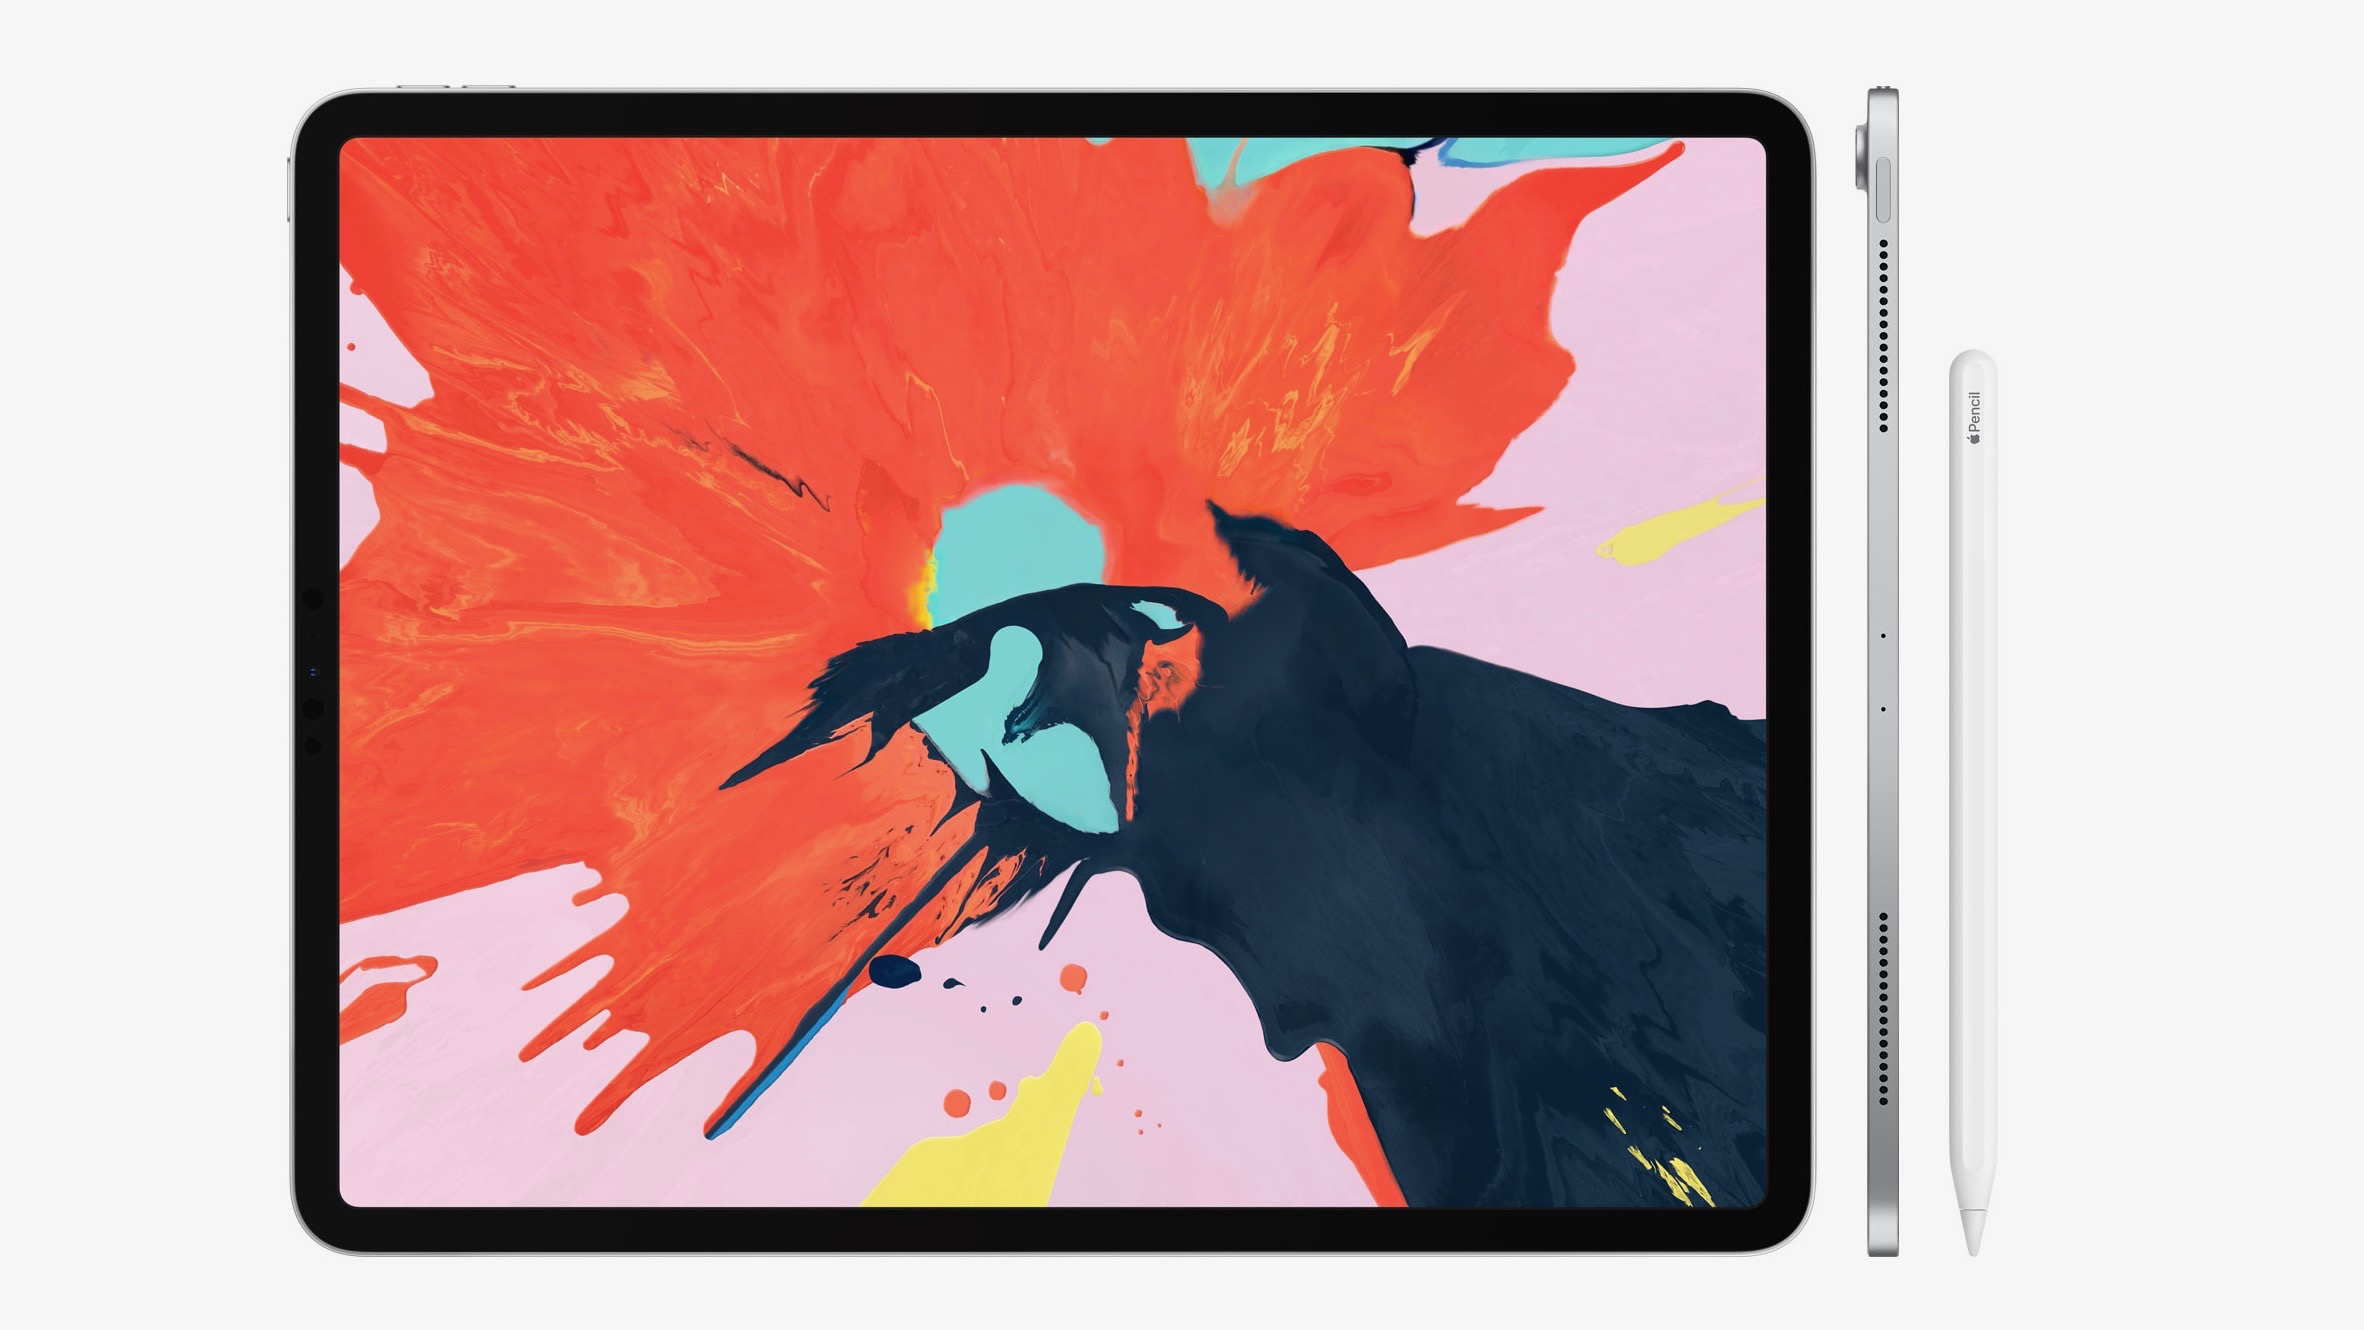 Ipad Pro Wallpapers Download Here For Any Device Gallery 9to5mac Images, Photos, Reviews